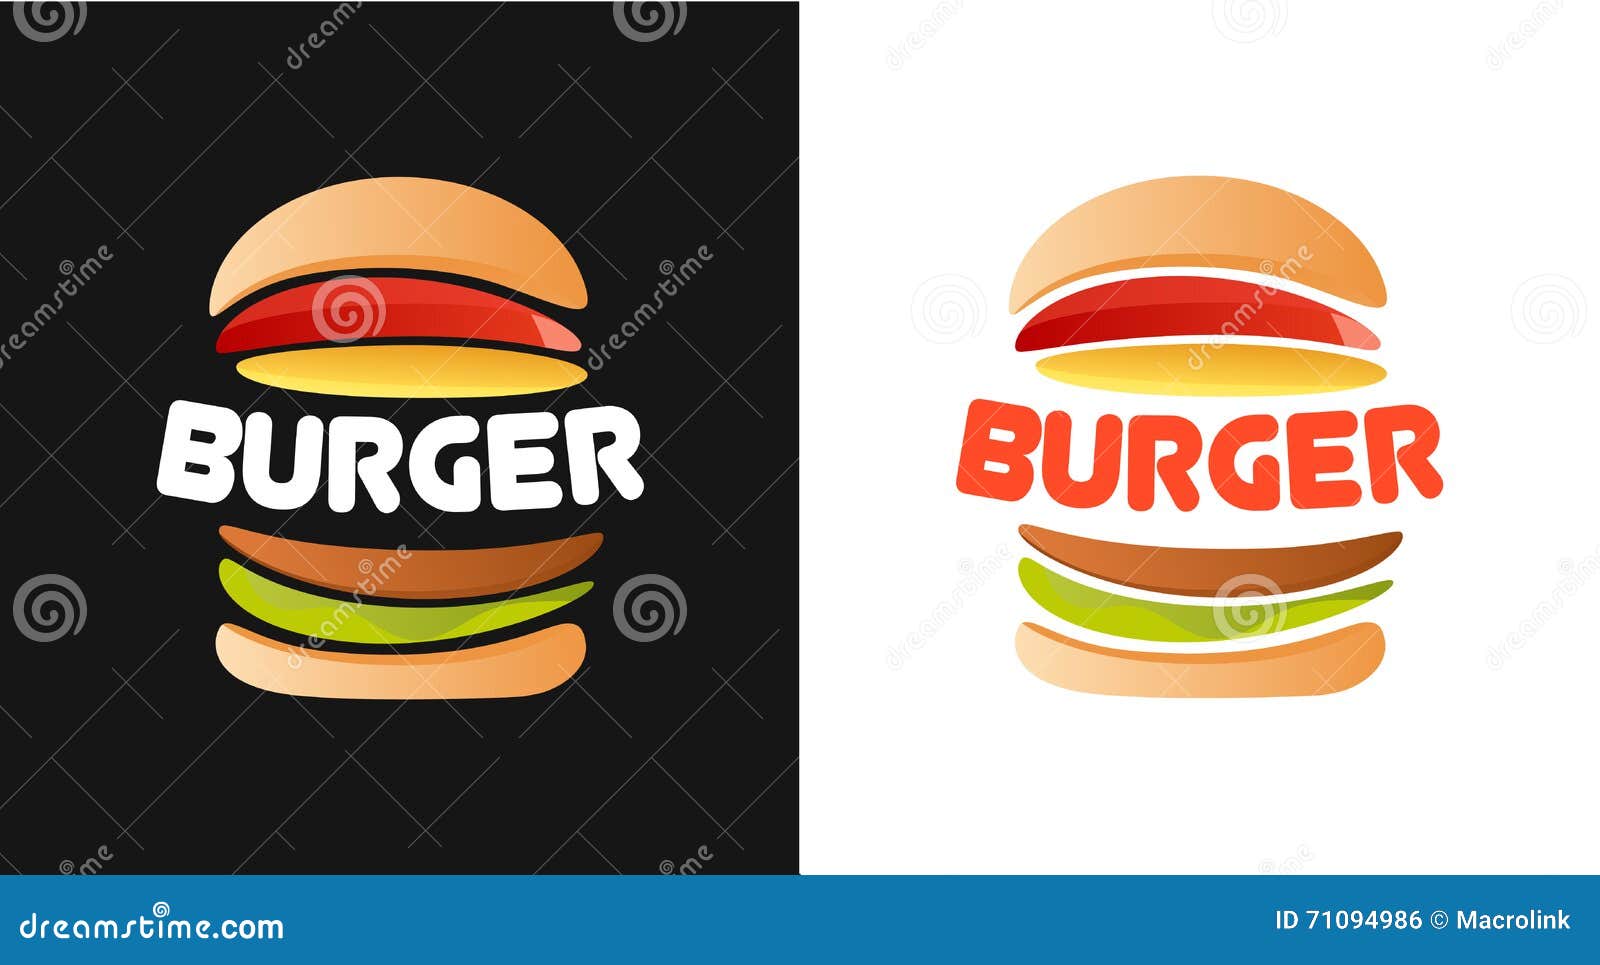 Design wonderful burger logo with express delivery by Tereas_amichie |  Fiverr